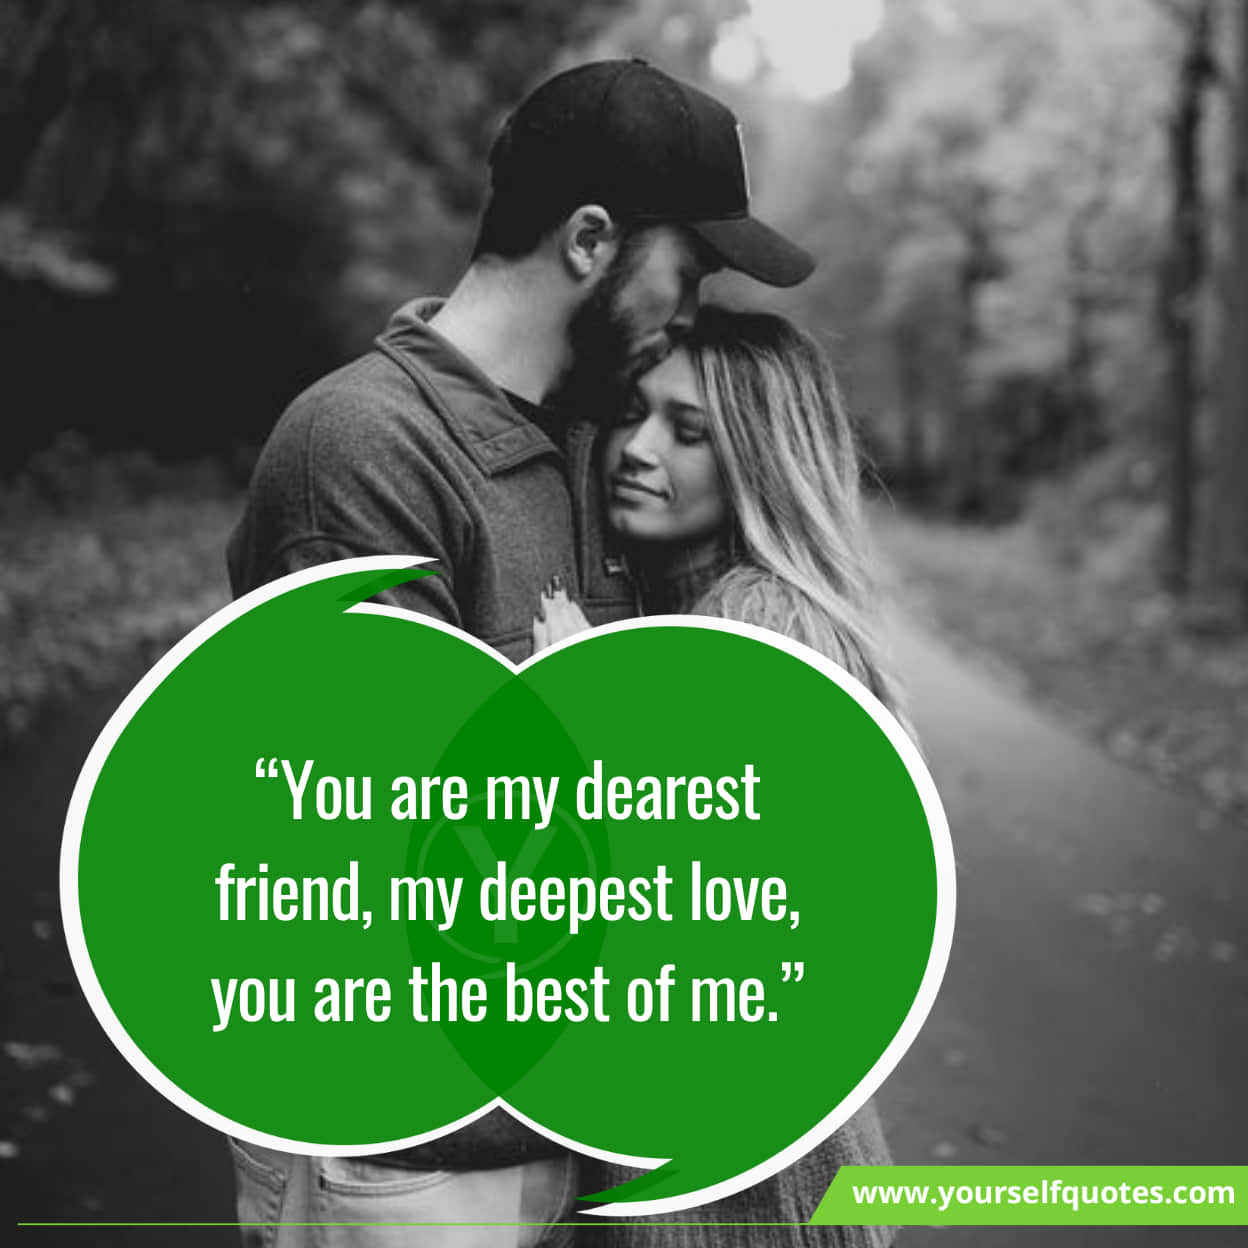 Emotional Soulmate Quotes for Her